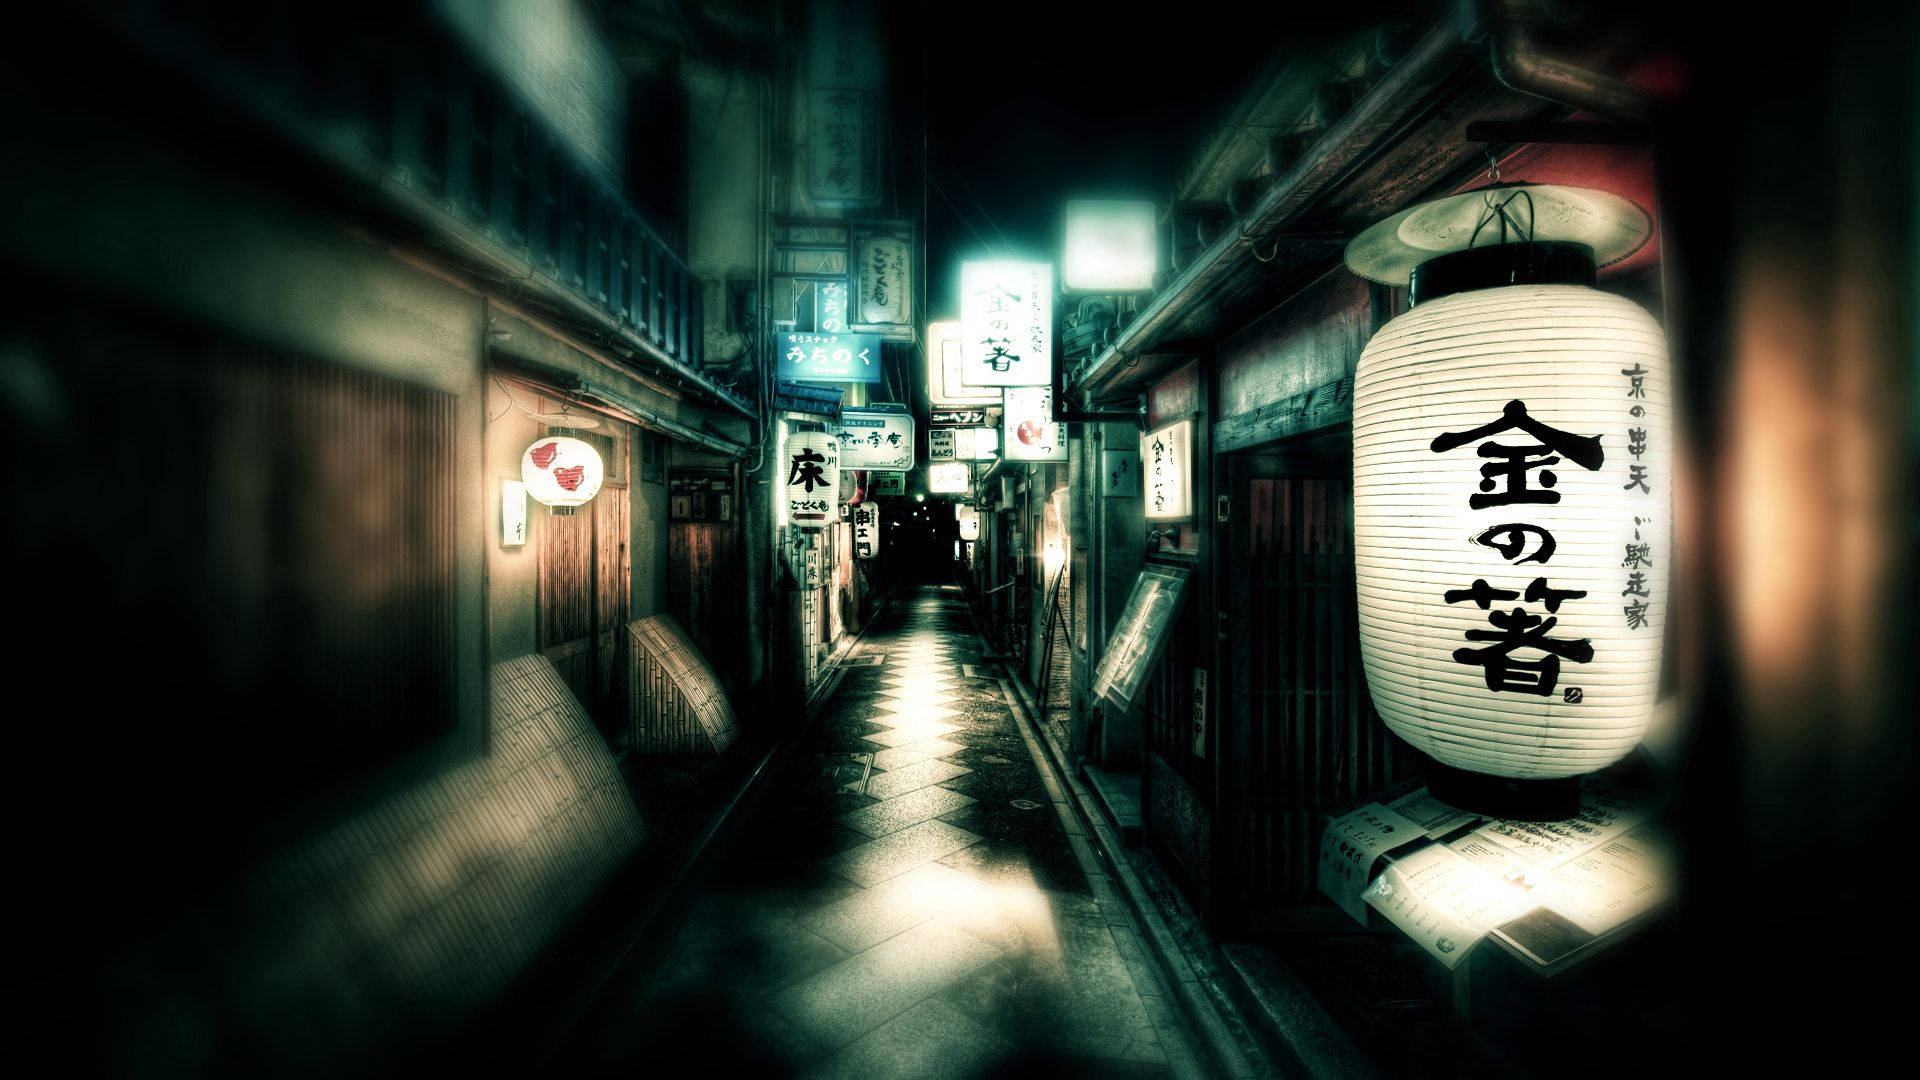 Japan At Night | A Traditional Street Lantern Lights Up The Way